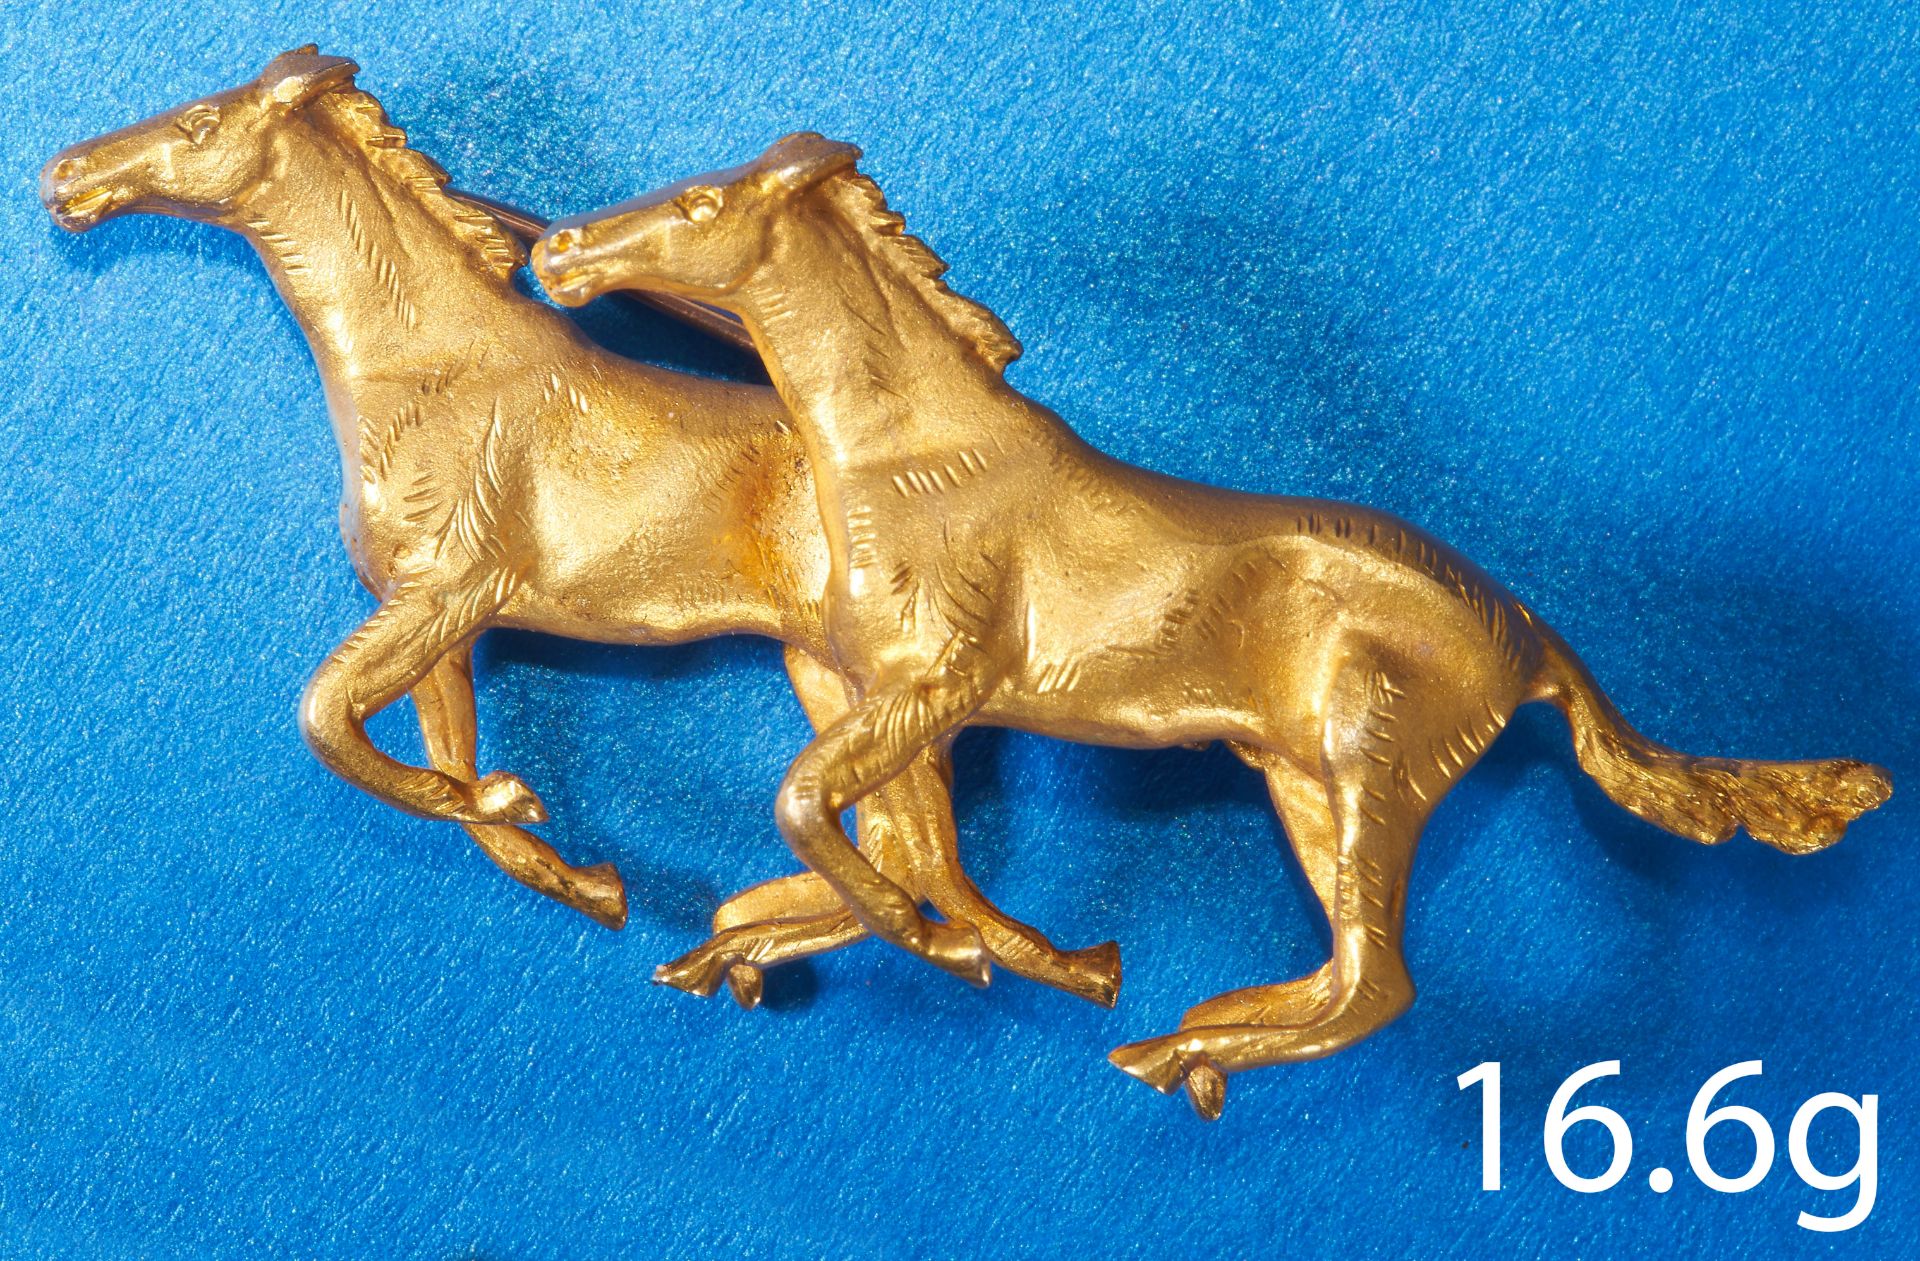 FINE AND DETAILED 2 GALLOPING HORSES GOLD BROOCH